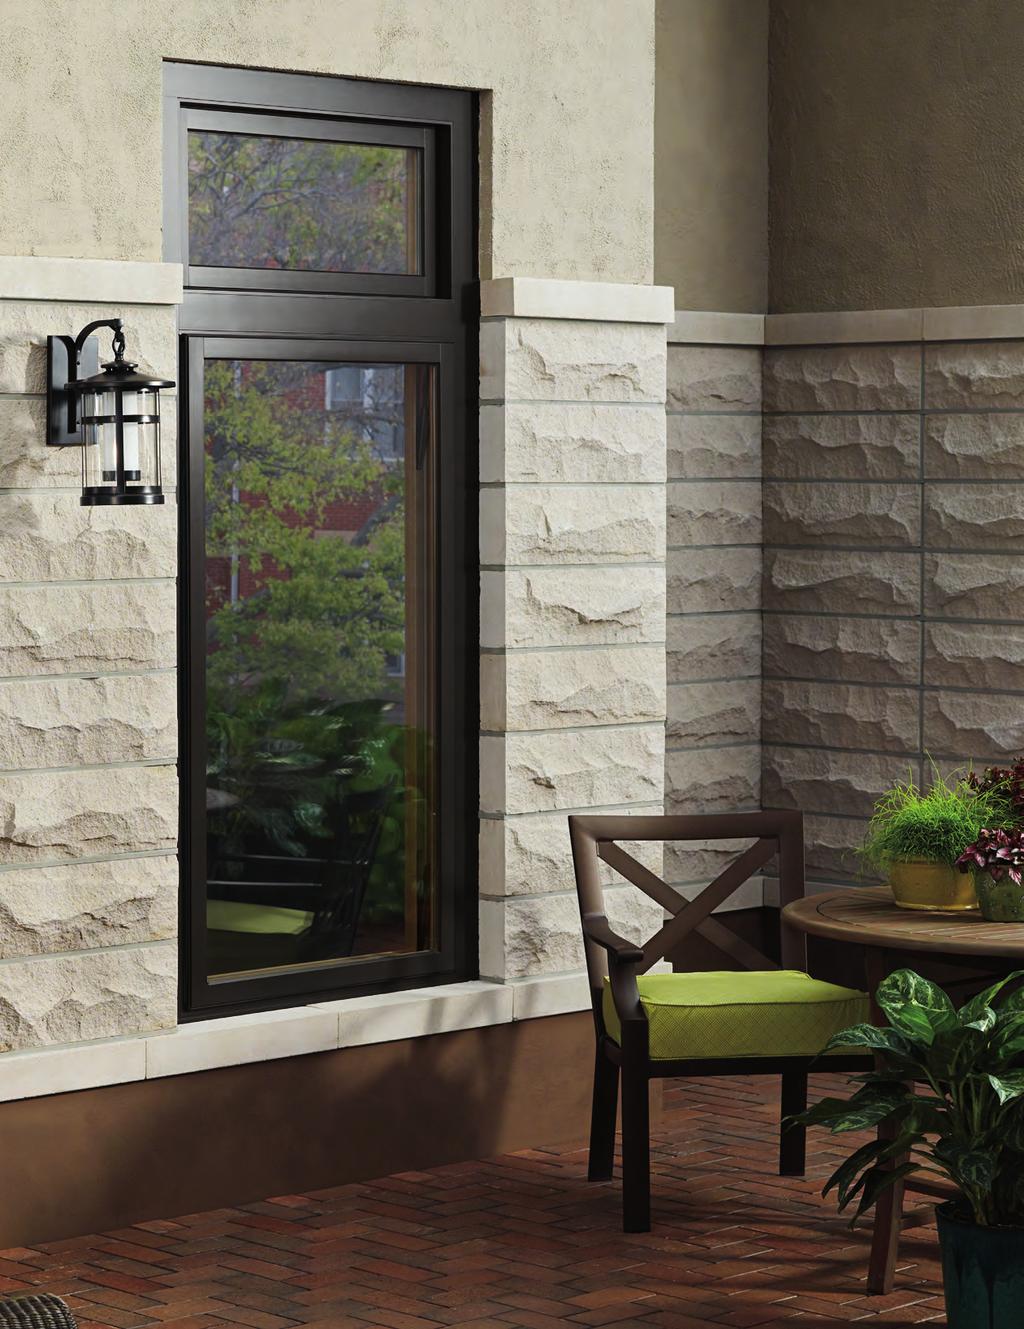 26 DESIGN TIP: By venting instead of cranking, this window maximizes outdoor space for an even greater entertaining area. Featured product detail: Exterior clad in Bronze.